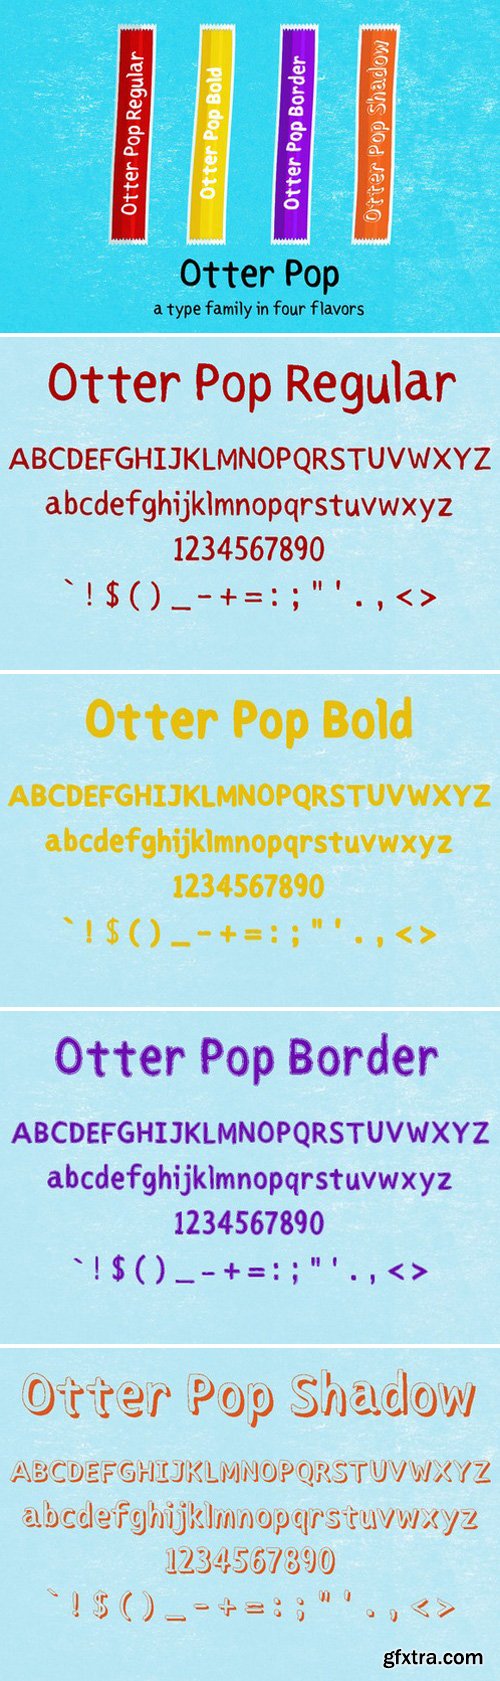 CM271780 - Otter Pop - Fonts in Four Flavors